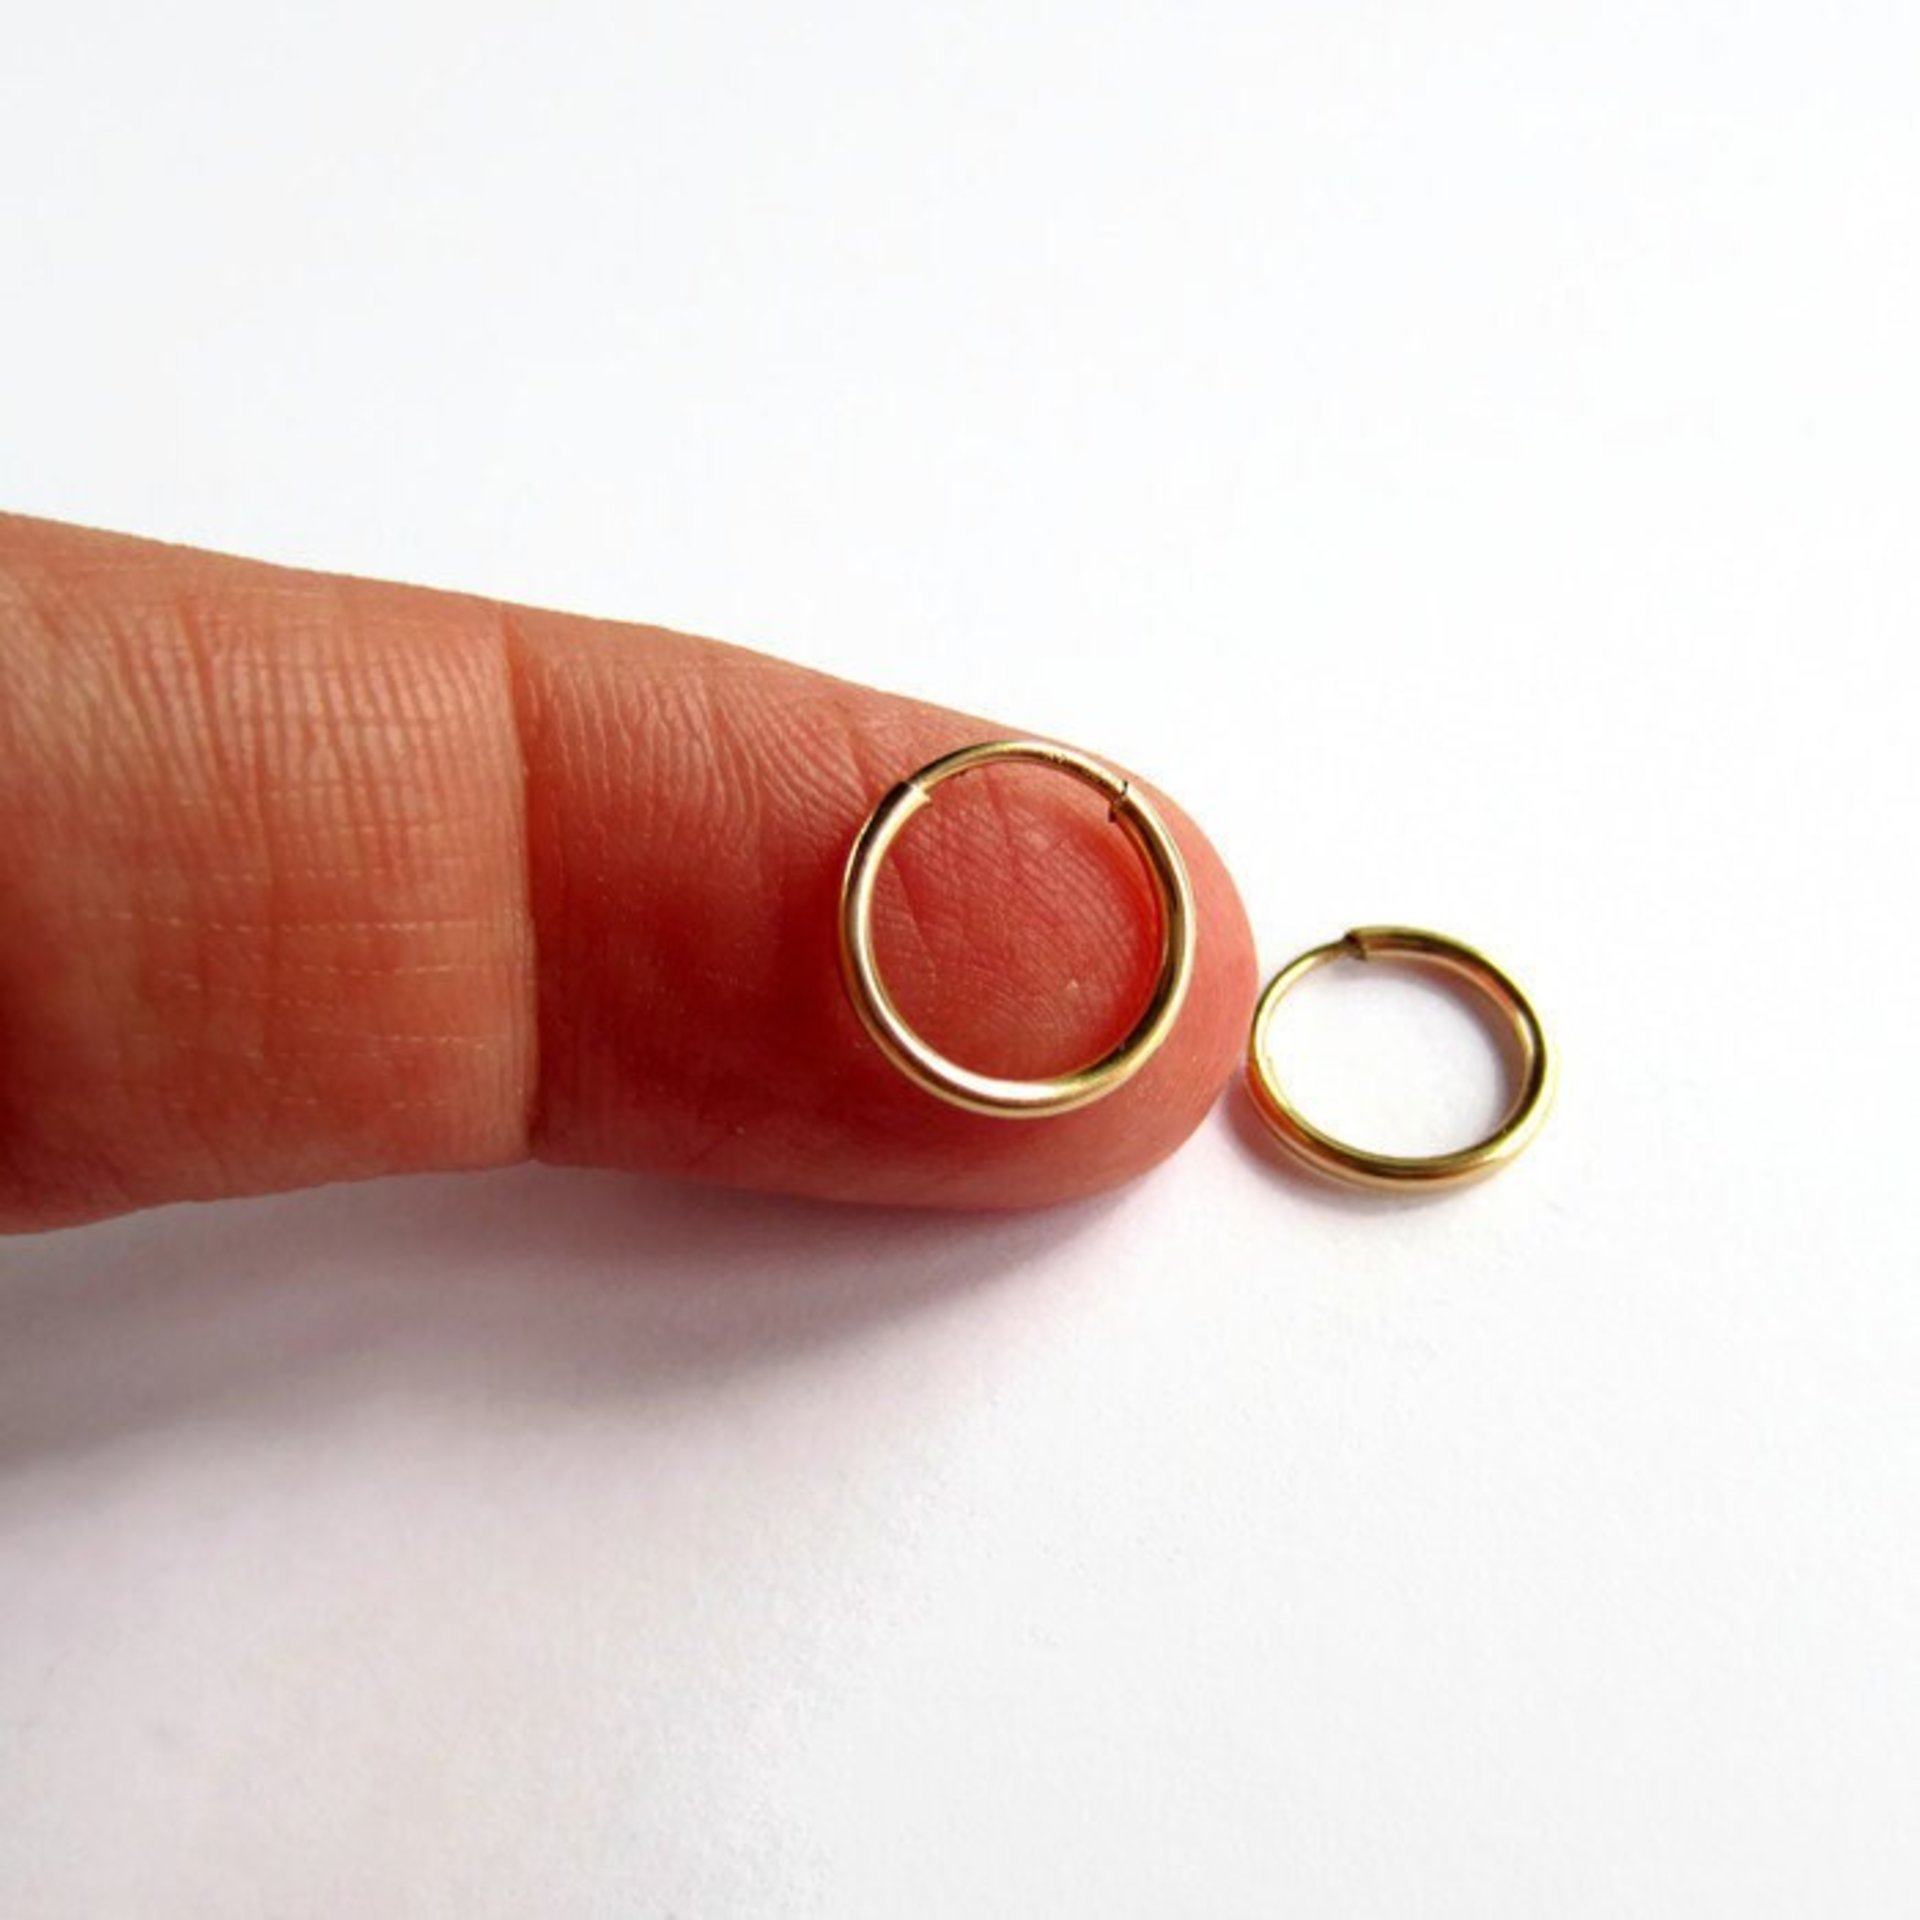 Single or Pair of Small 12mm 14K Gold Filled Huggie Hoop Earrings ~ The Tiny Tree Frog Jewellery